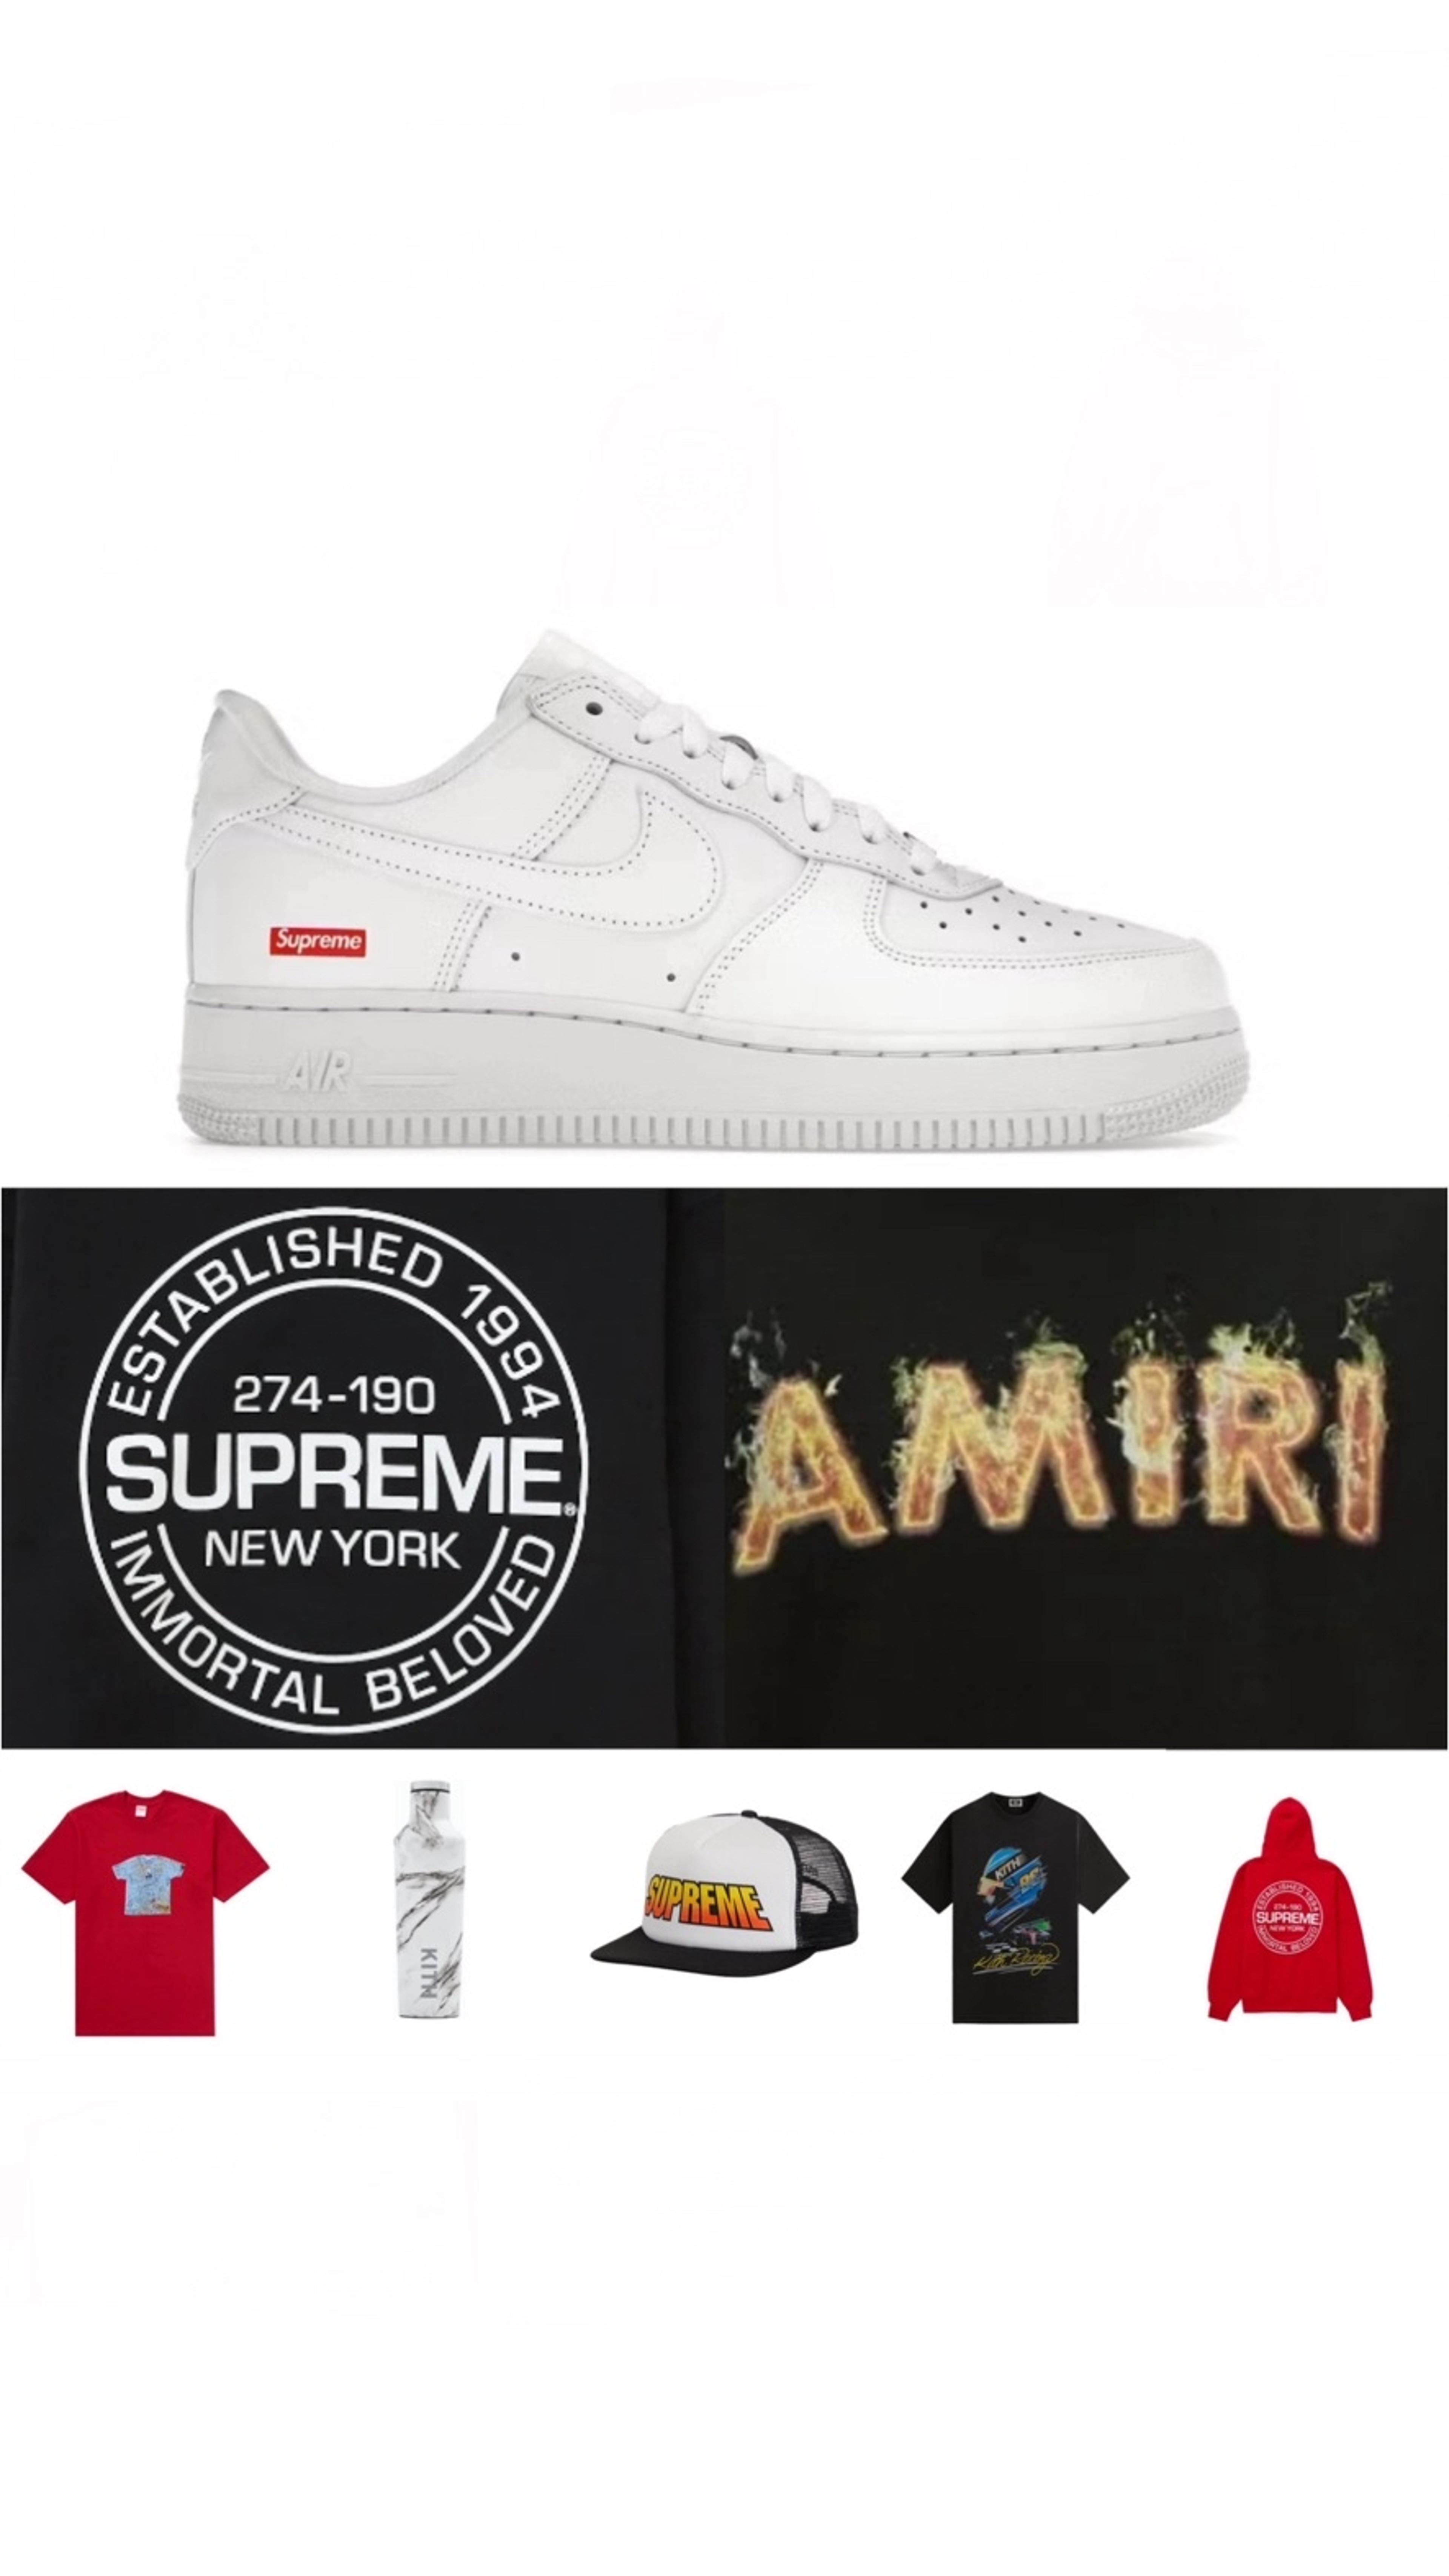 Preview image for the show titled "23/30 AMIRI,SUPREME, KITH AND MORE‼️" at Tomorrow @ 1:45 AM